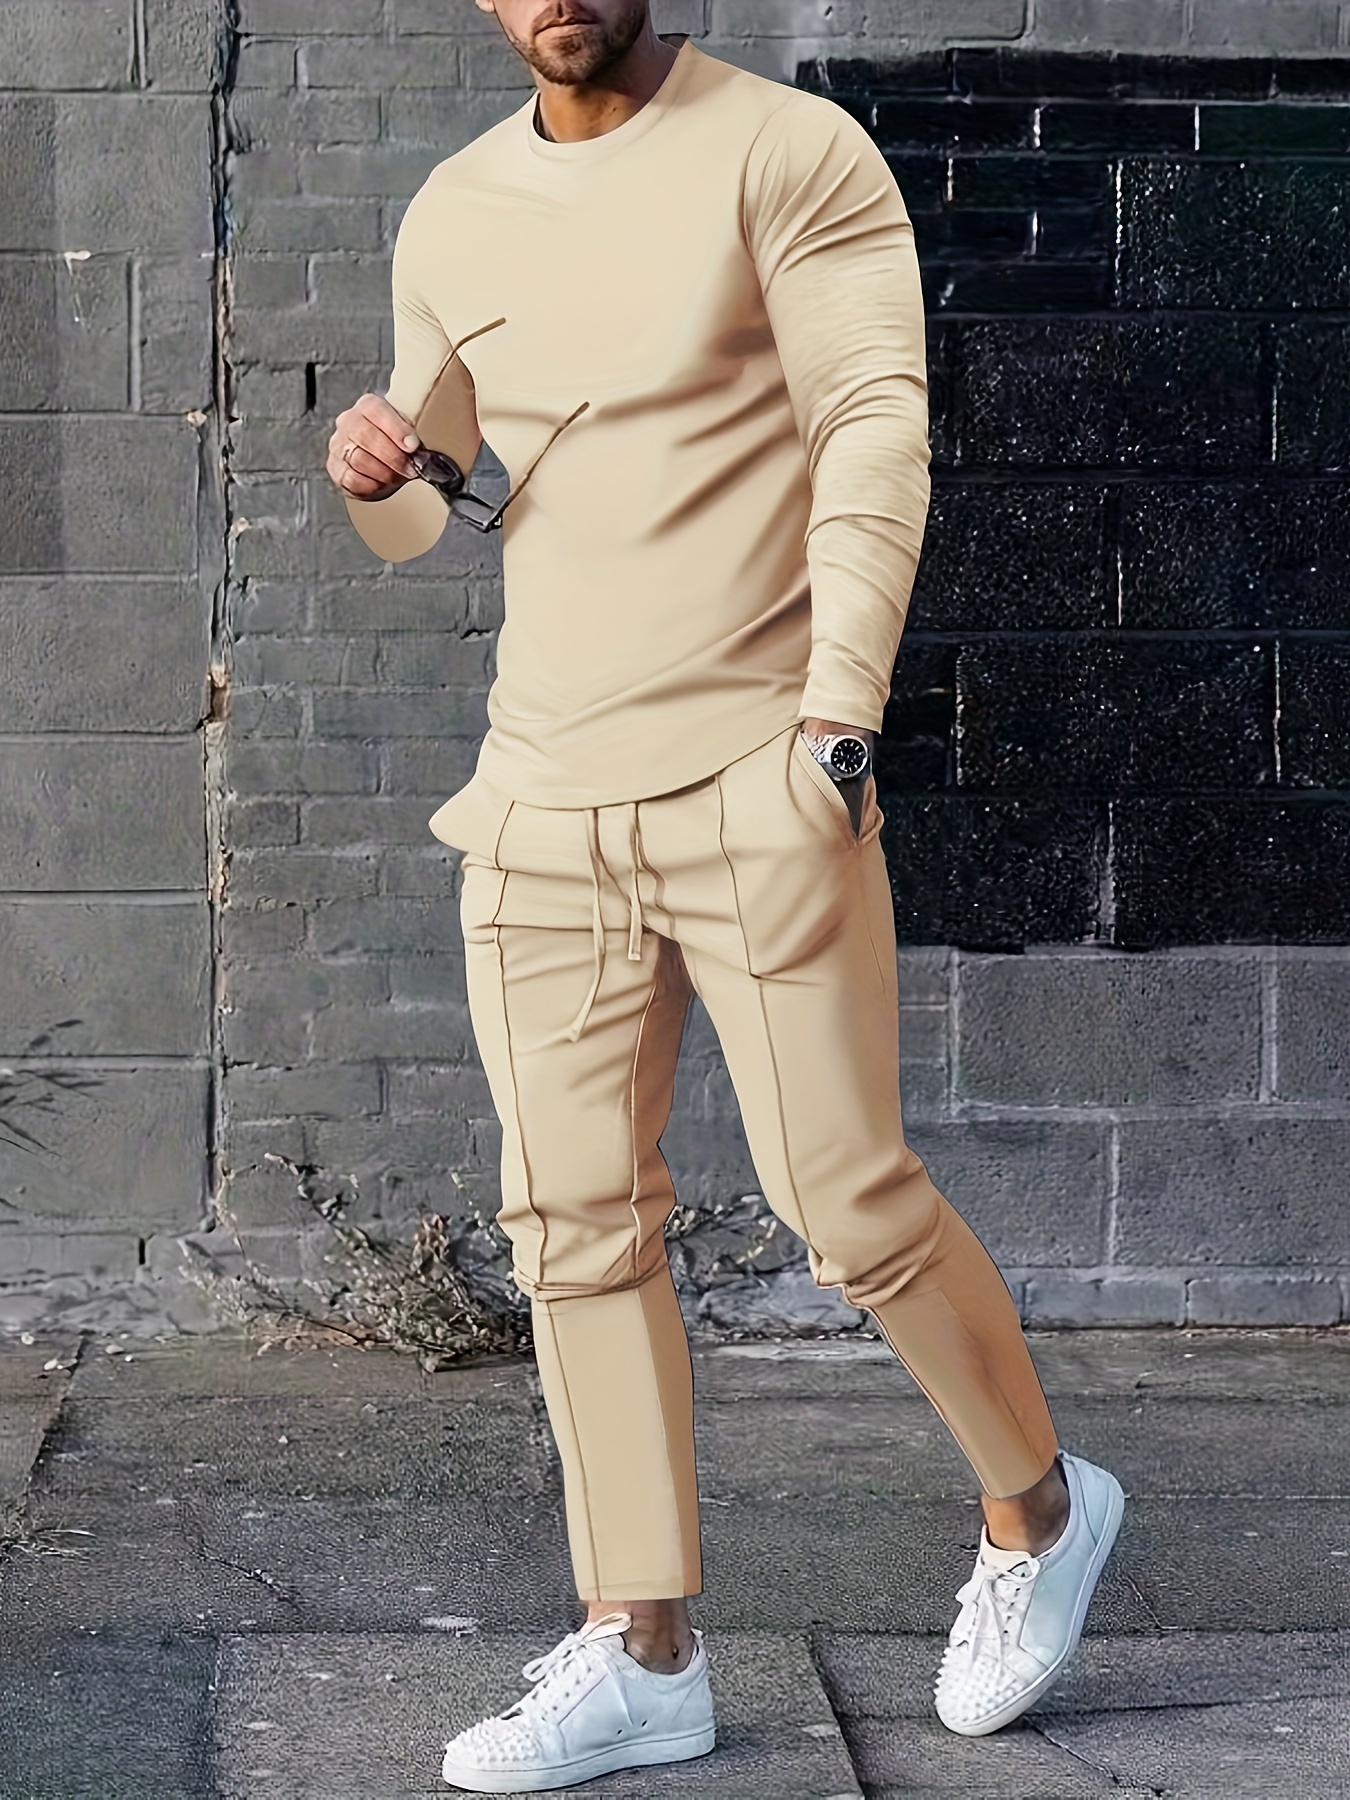 Mens Outfit 2-Piece Set Long Sleeve T Shirts and Pants Sweatsuit